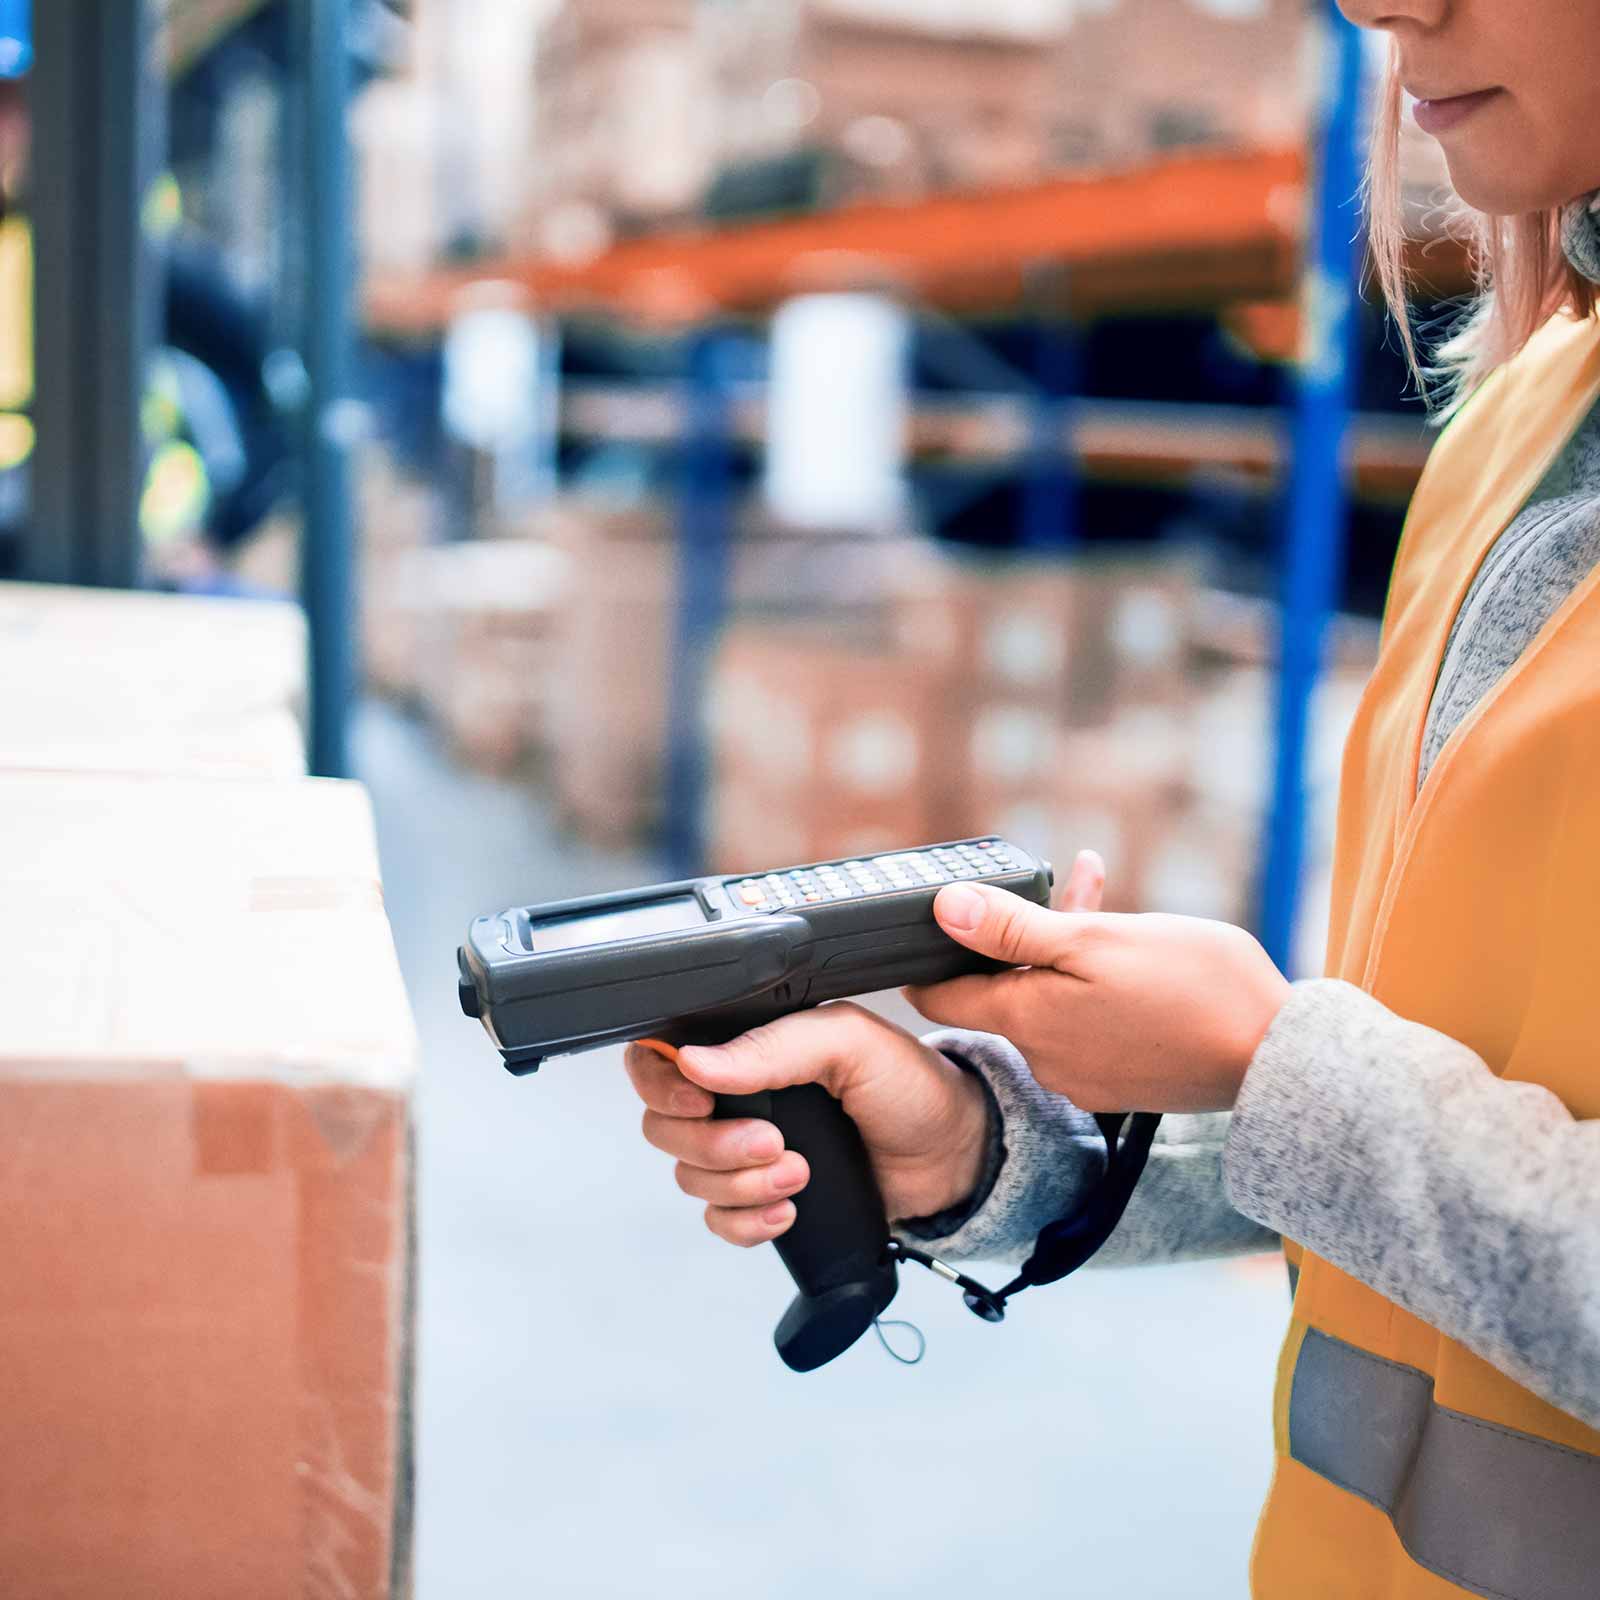 Worker scanning items in a warehouse.